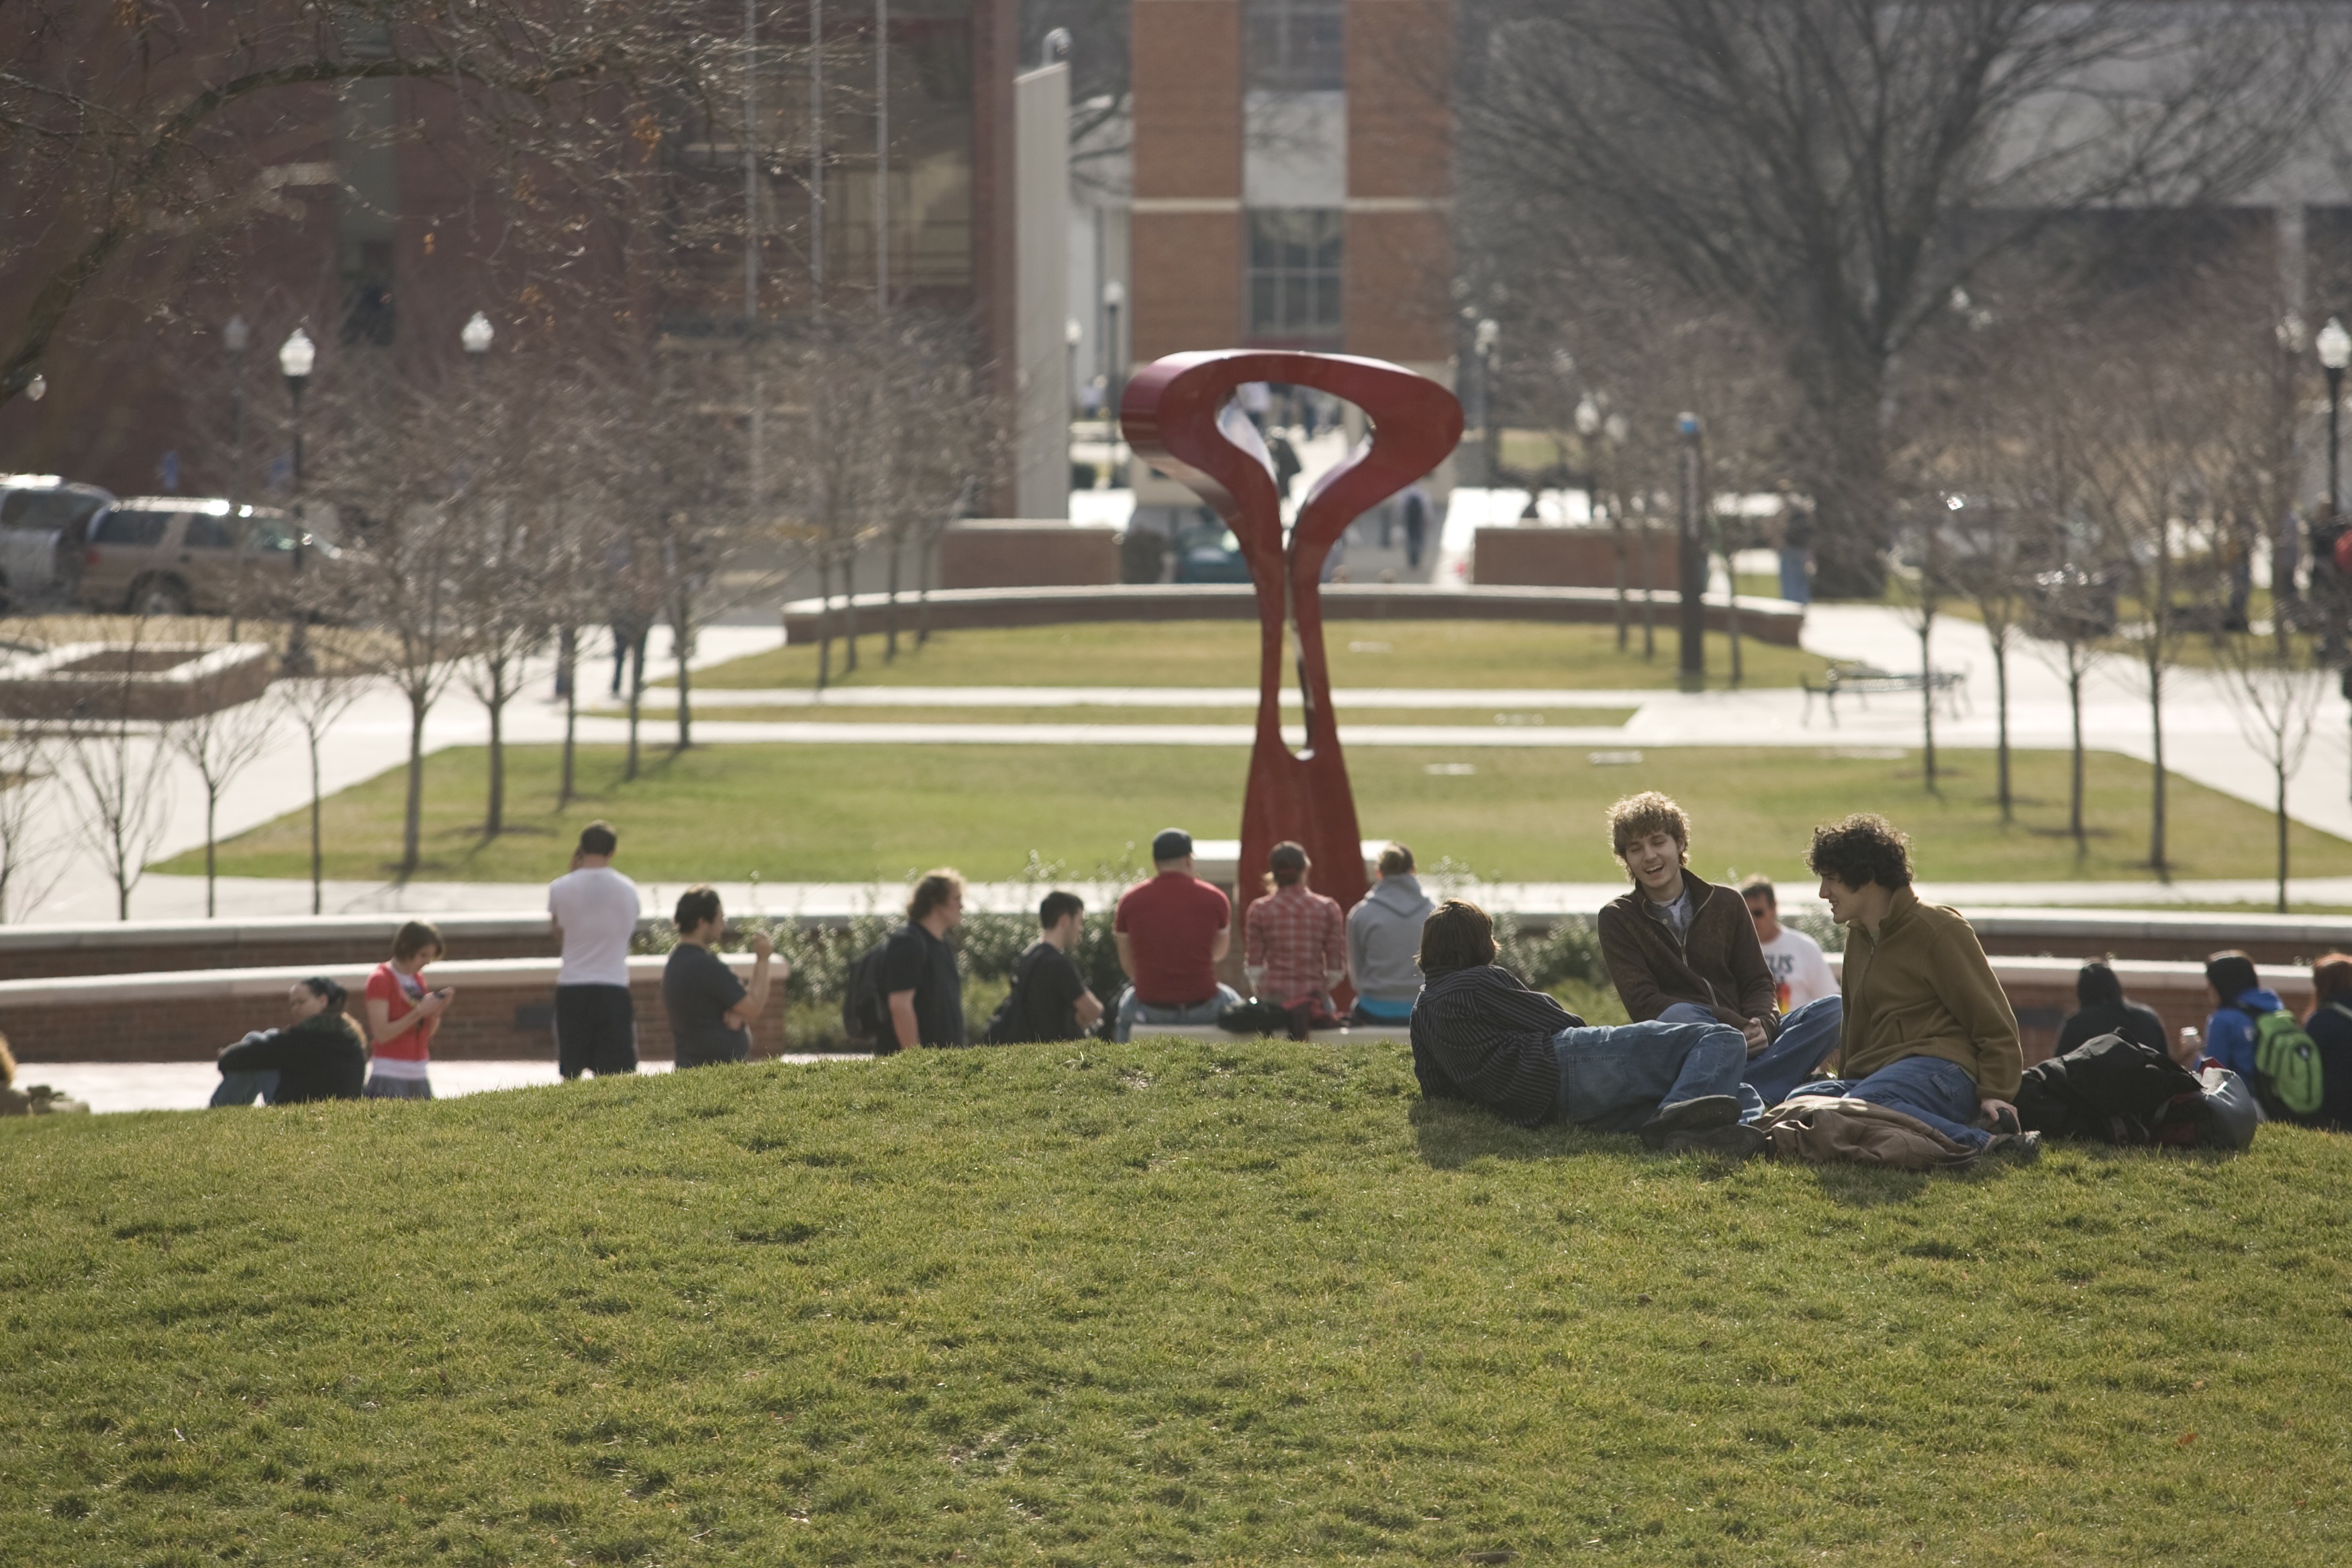 Students sitting on lawn